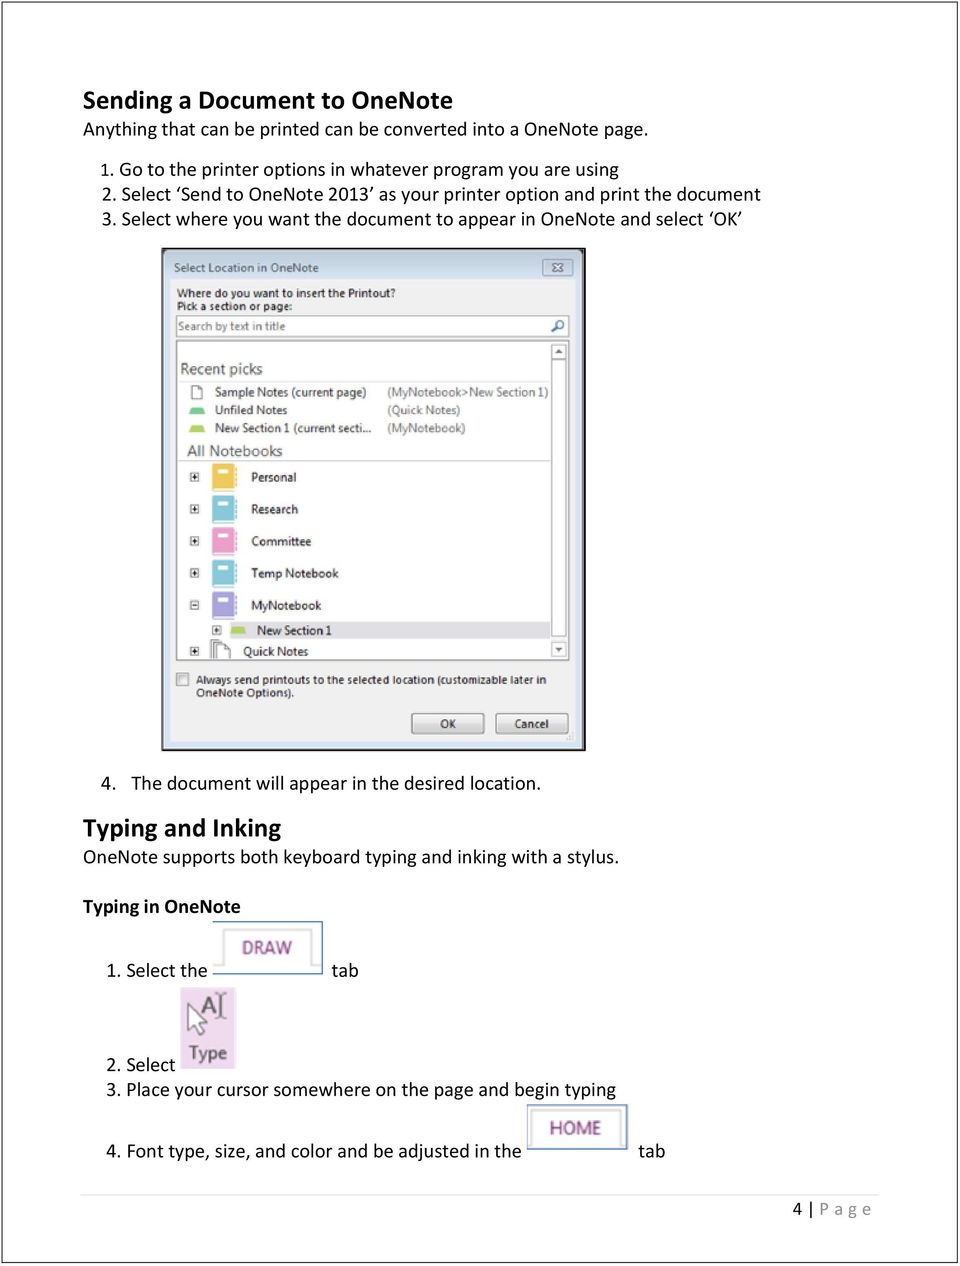 Select where you want the document to appear in OneNote and select OK 4. The document will appear in the desired location.